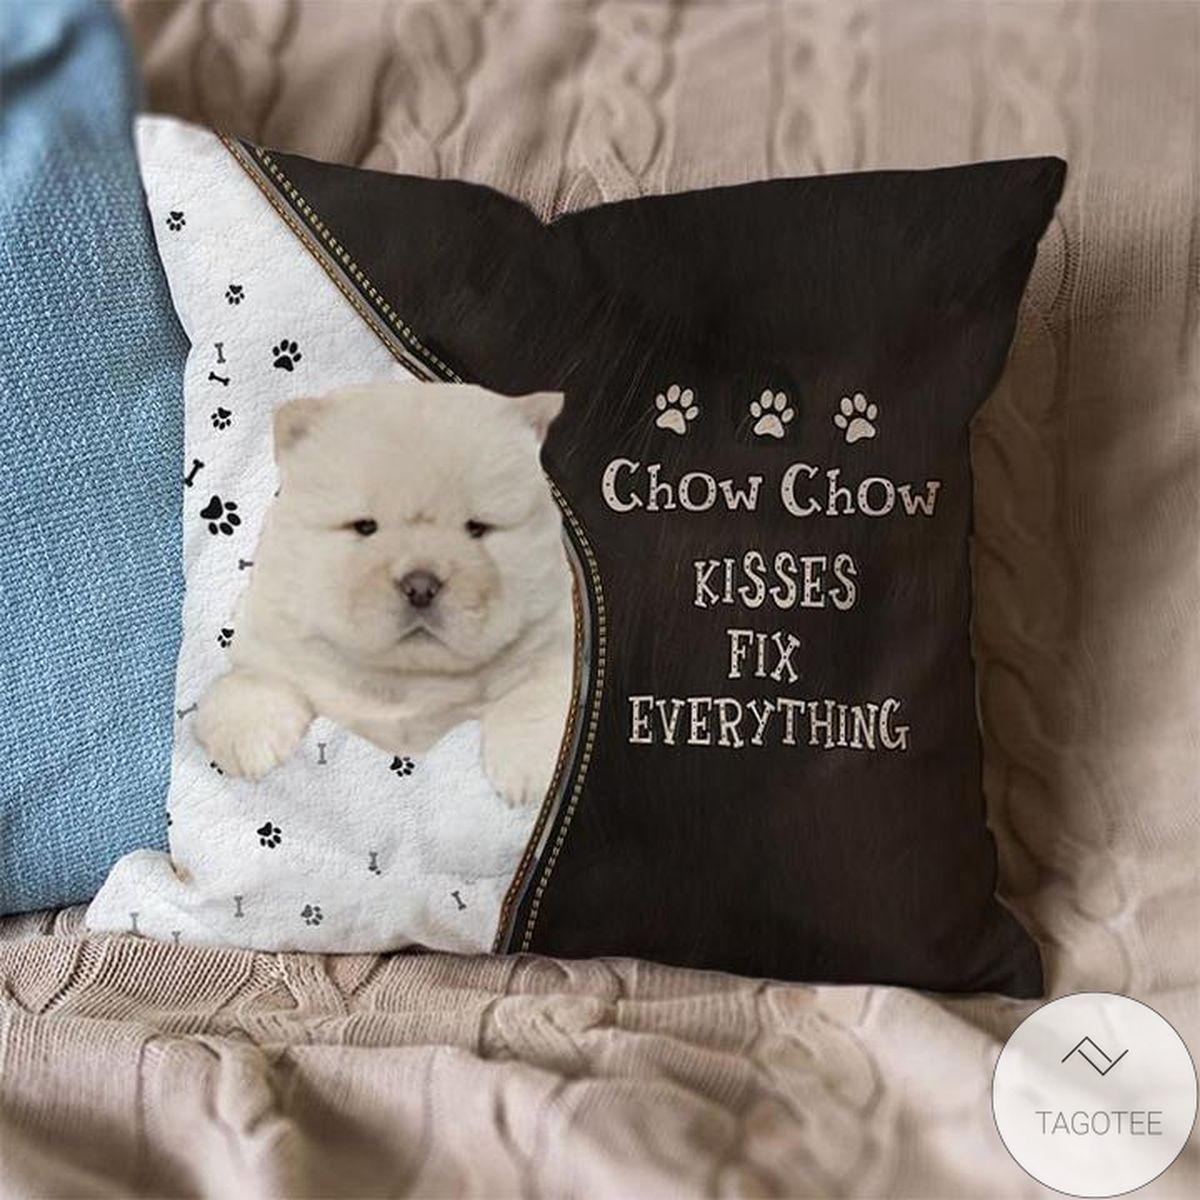 Chow Chow Kisses Fix Everything Pillowcase